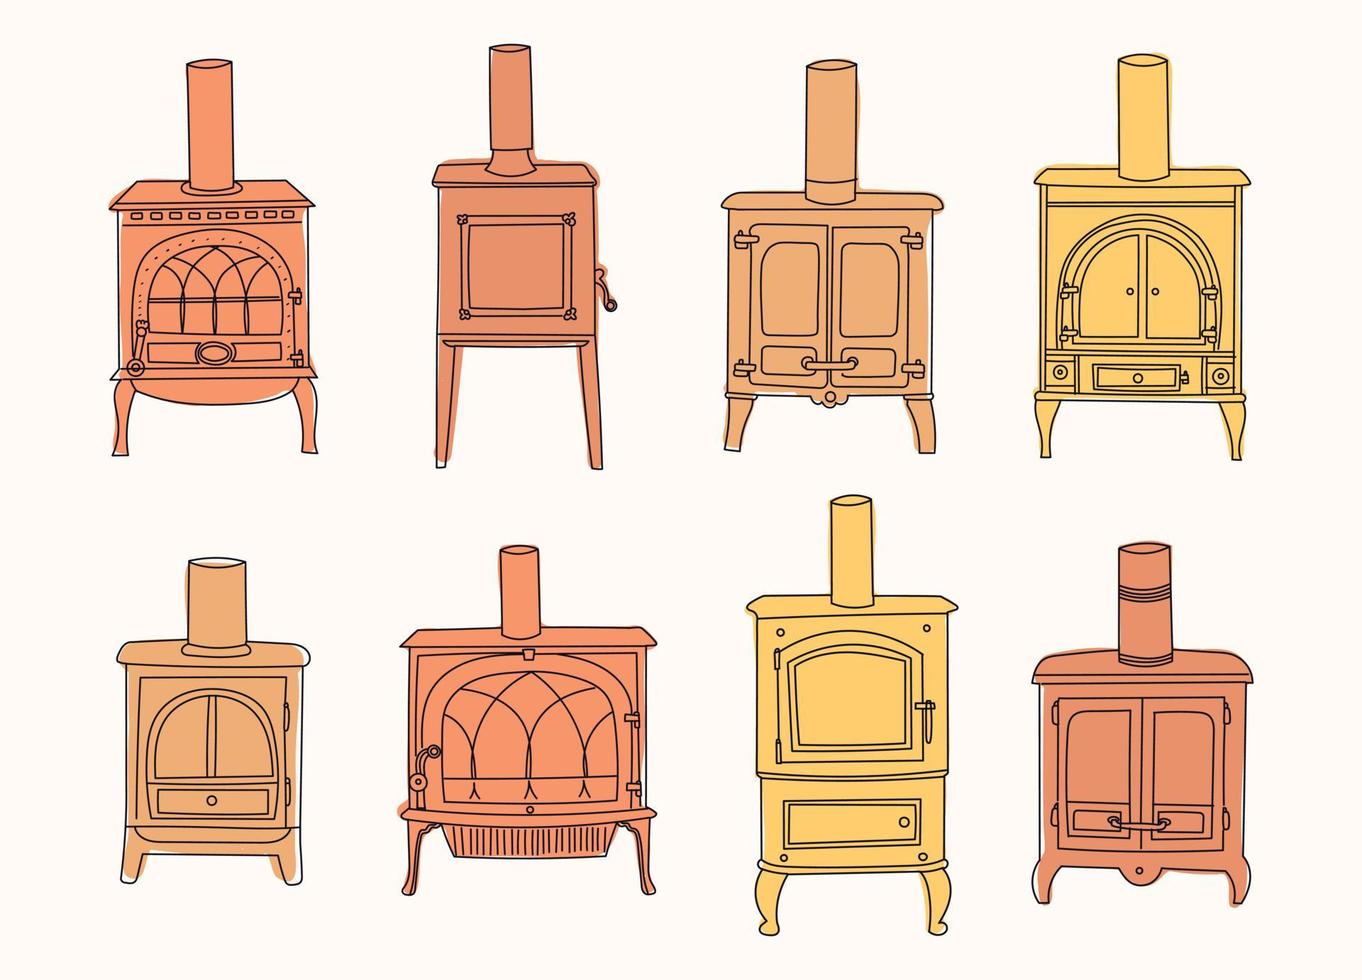 Hand drawn colored fireplace stove icon set in a doodle style isolated on white background. vector